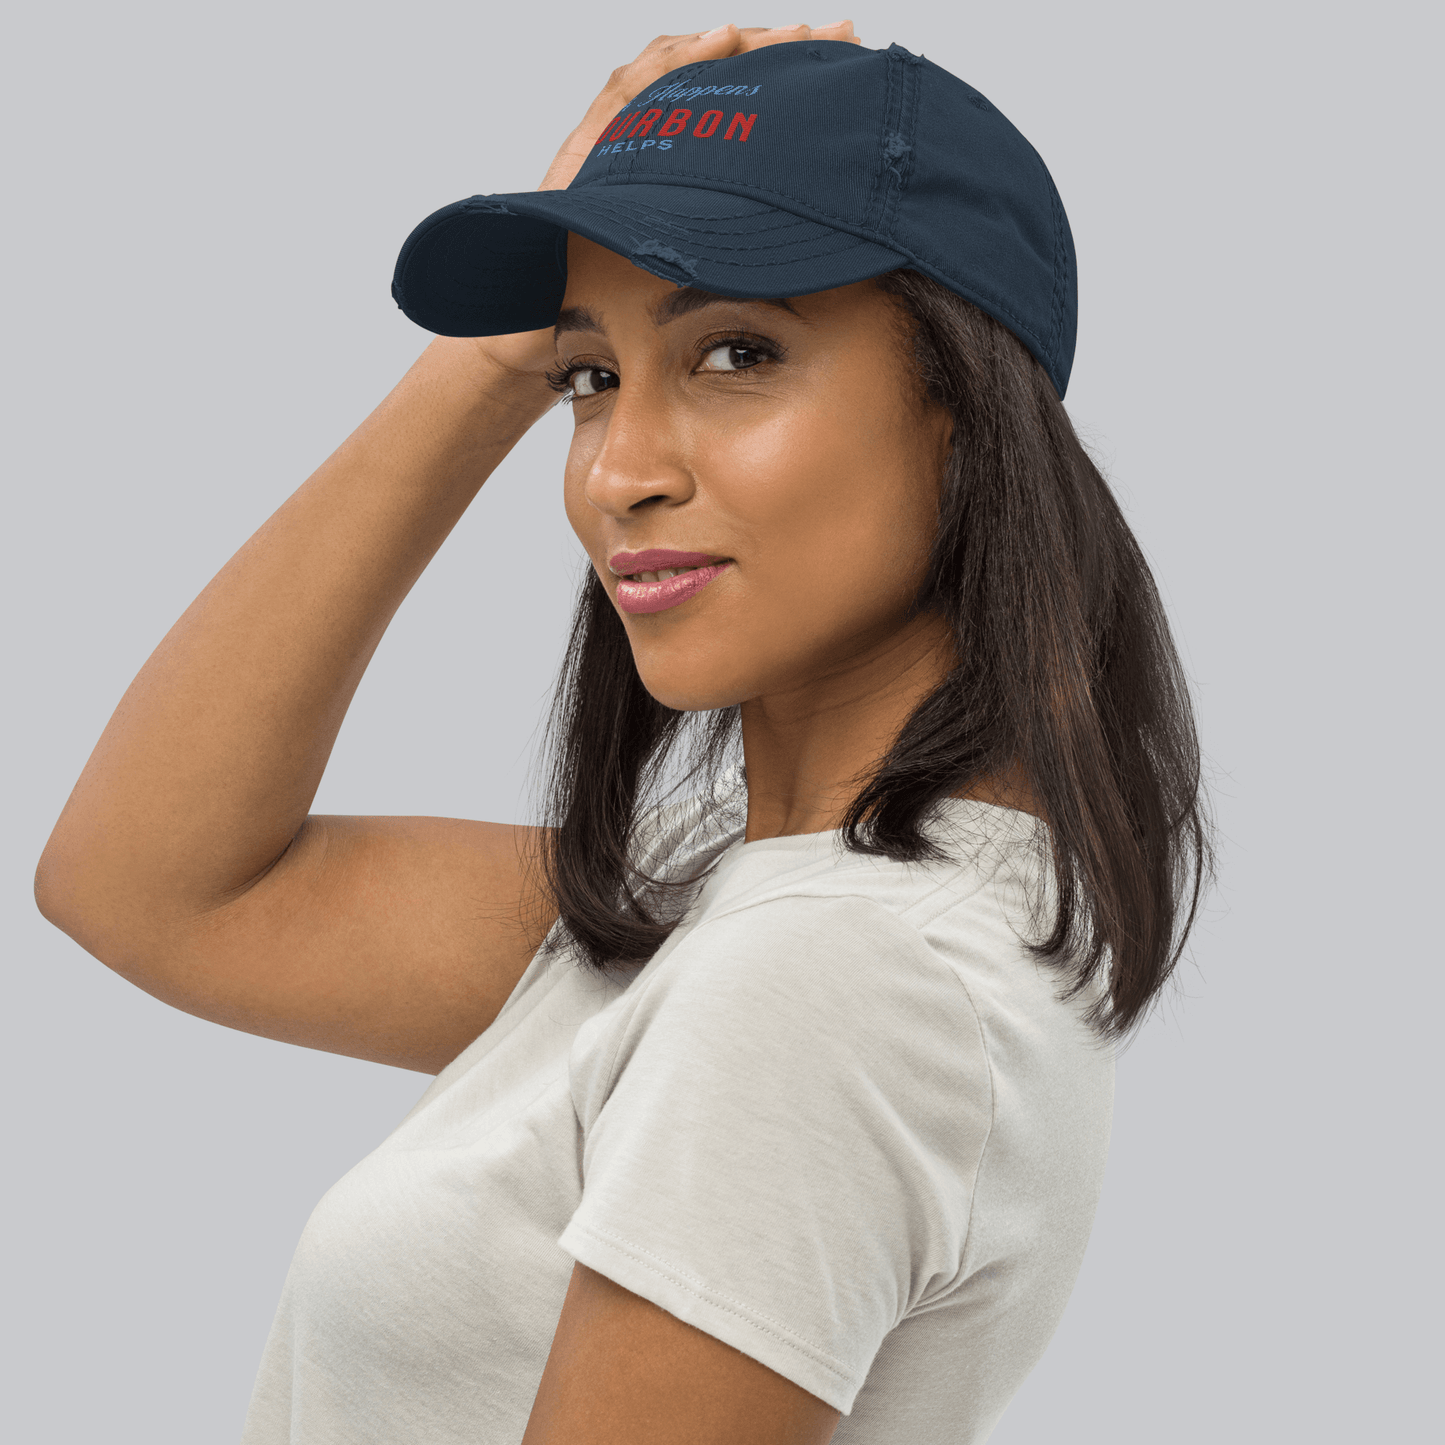 "Life Happens Bourbon Helps" Dad Hat | Fun & Edgy CapAdd flair with our "Life Happens Bourbon Helps" Dad Hat. Perfect for drinking enthusiasts. Distressed style, 100% cotton for comfort & style.